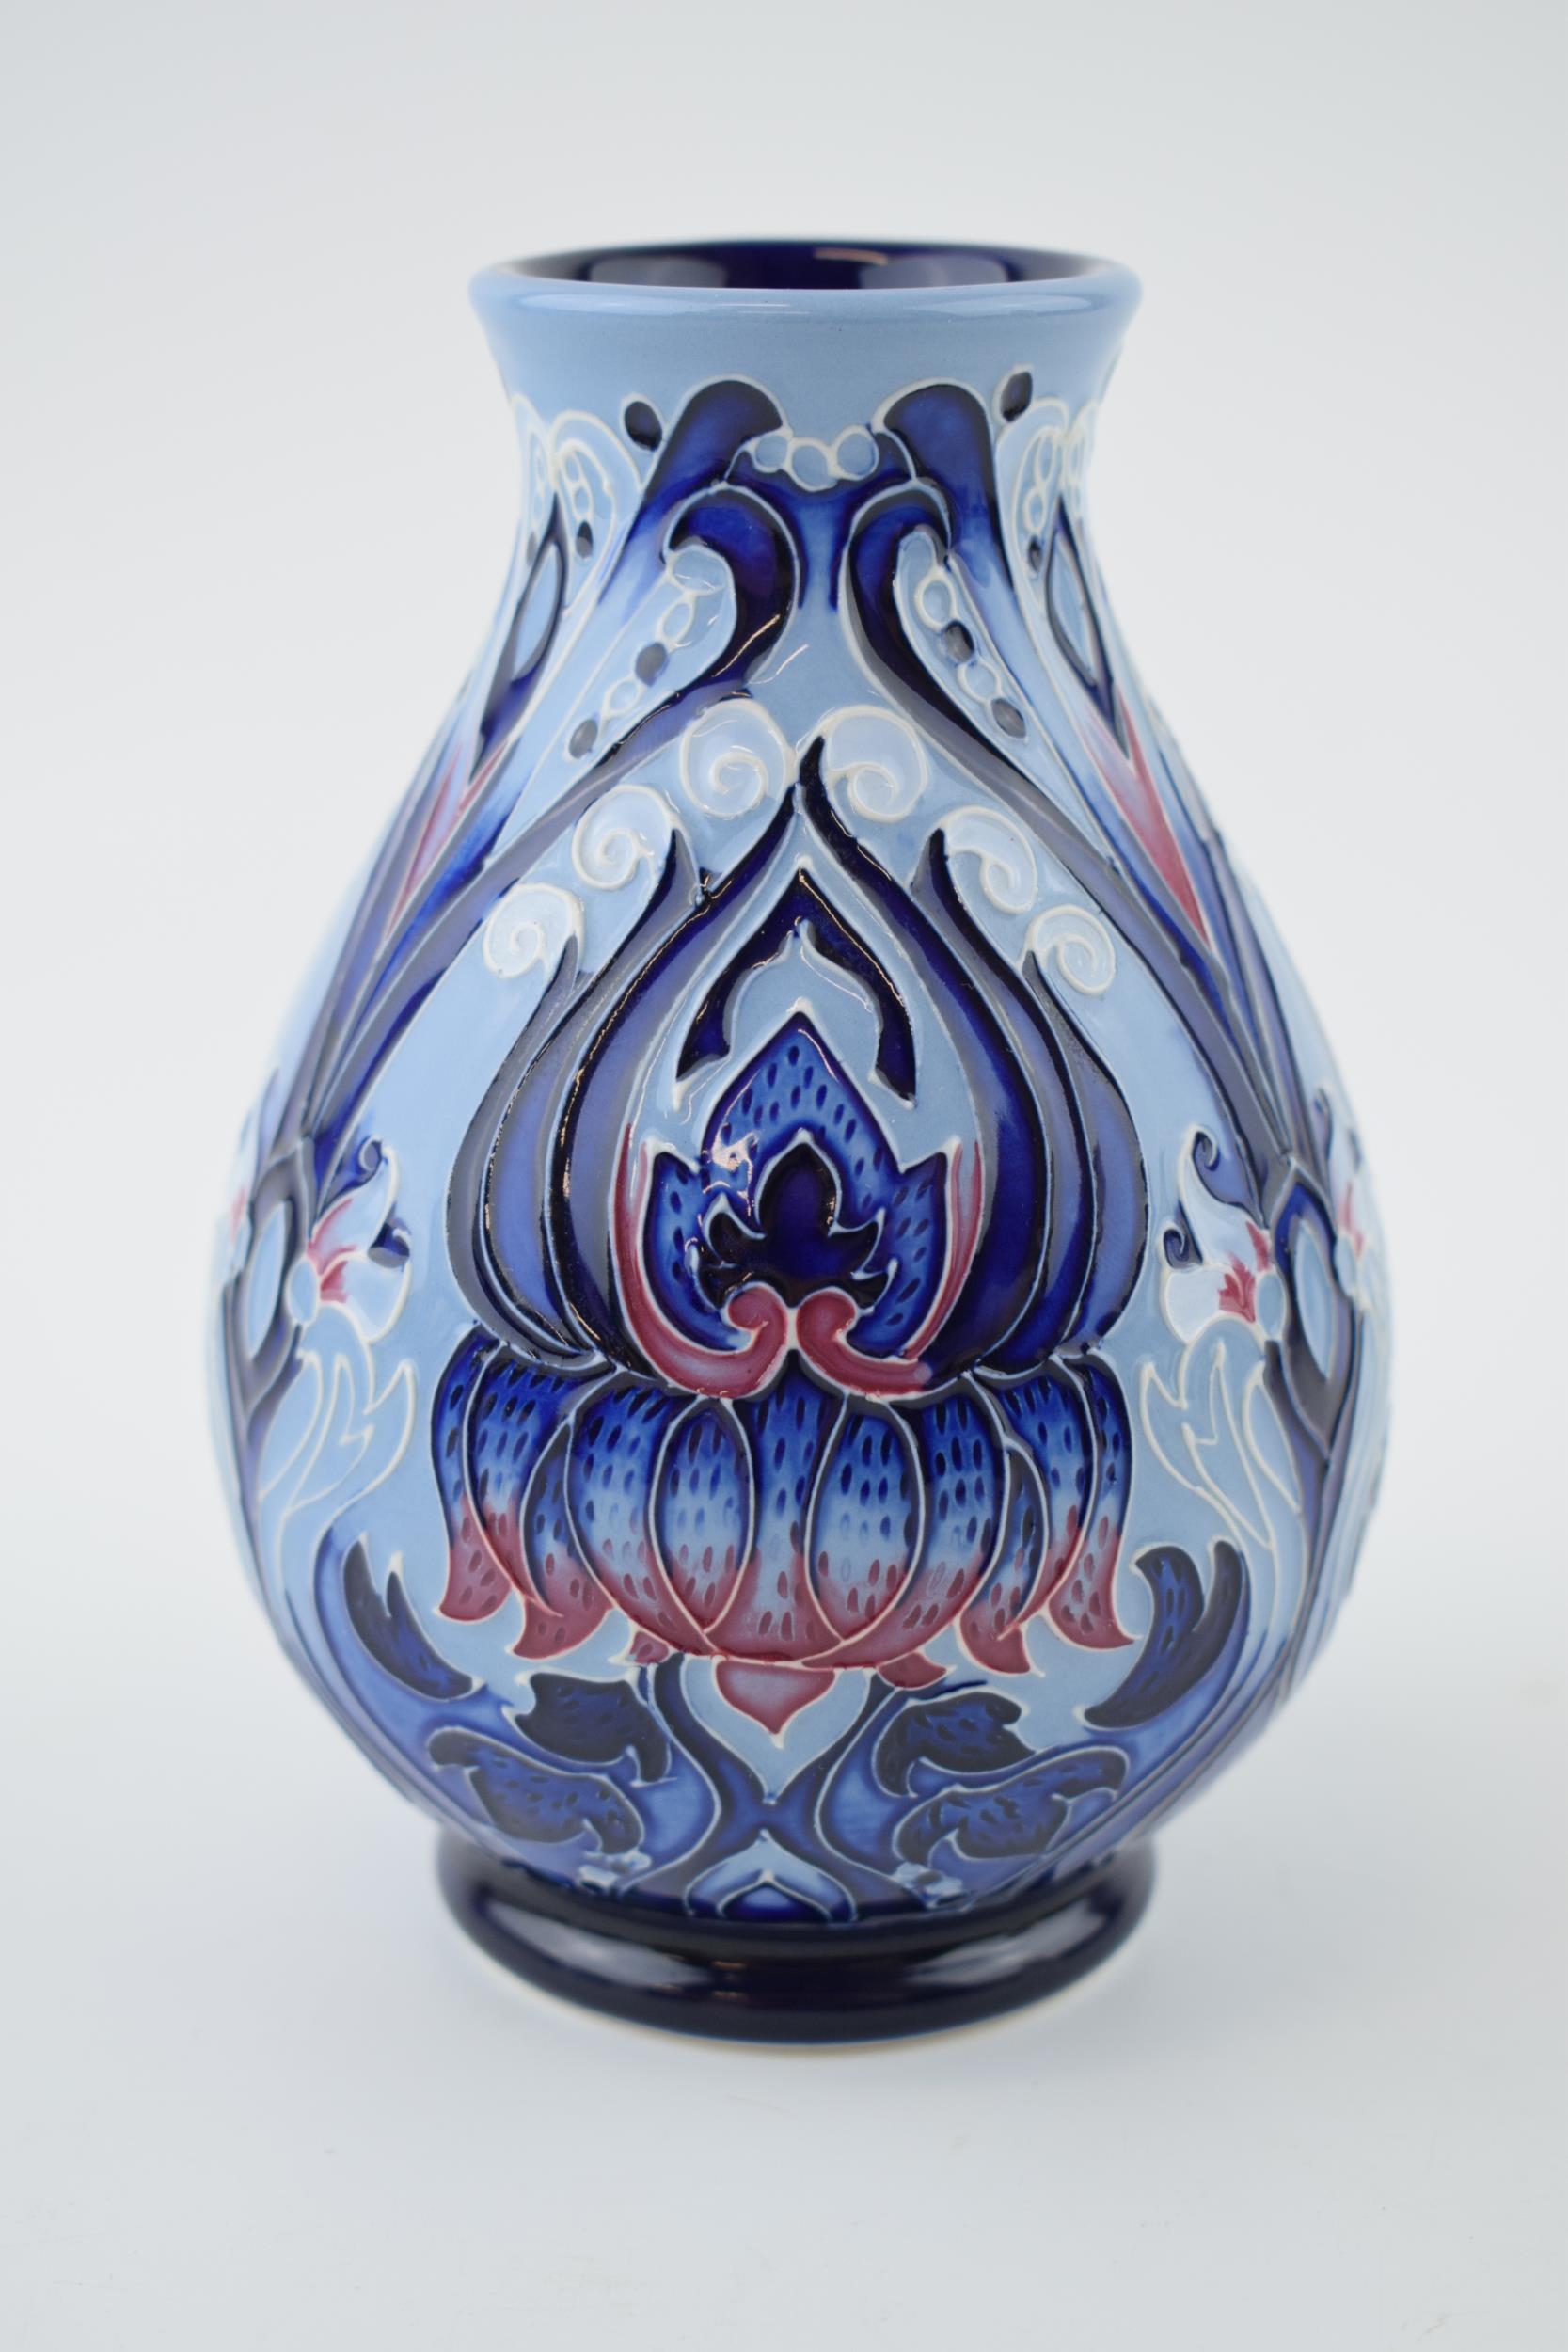 Moorcroft limited edition vase in the Crown Imperial pattern, 34/150, 2010, 14cm tall. In good